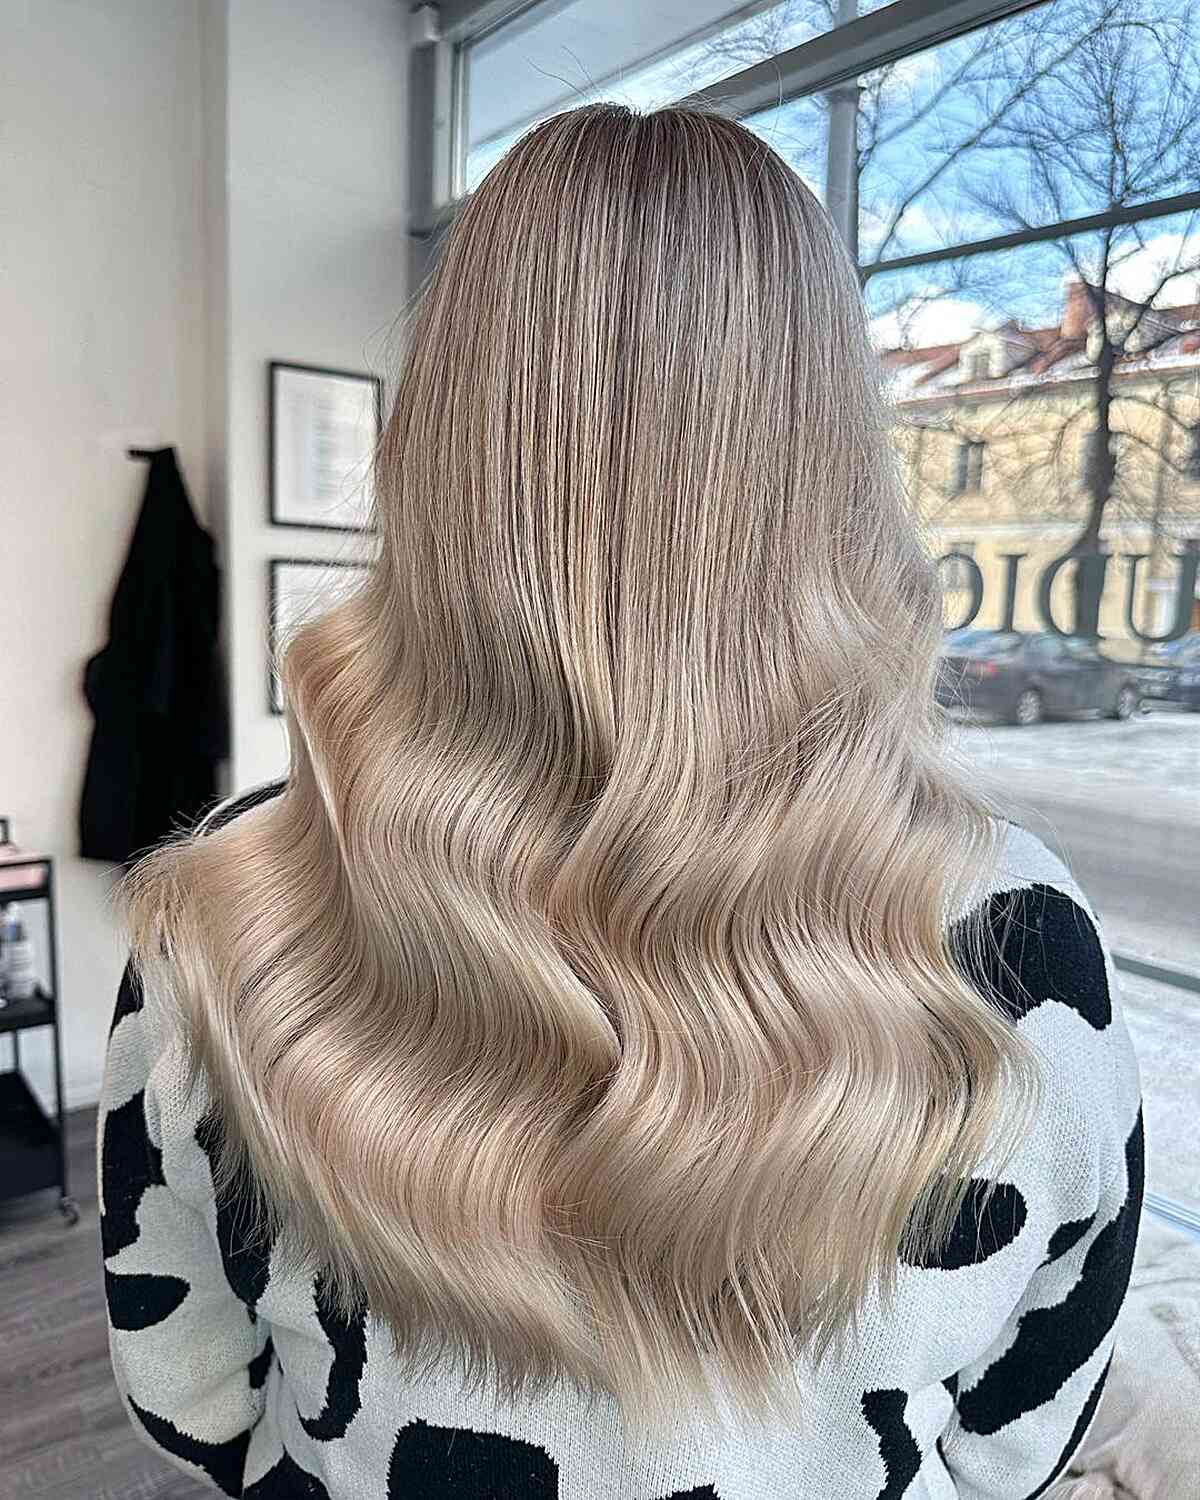 Natural Highlights for Long Blonde Hair for women with long wavy hair